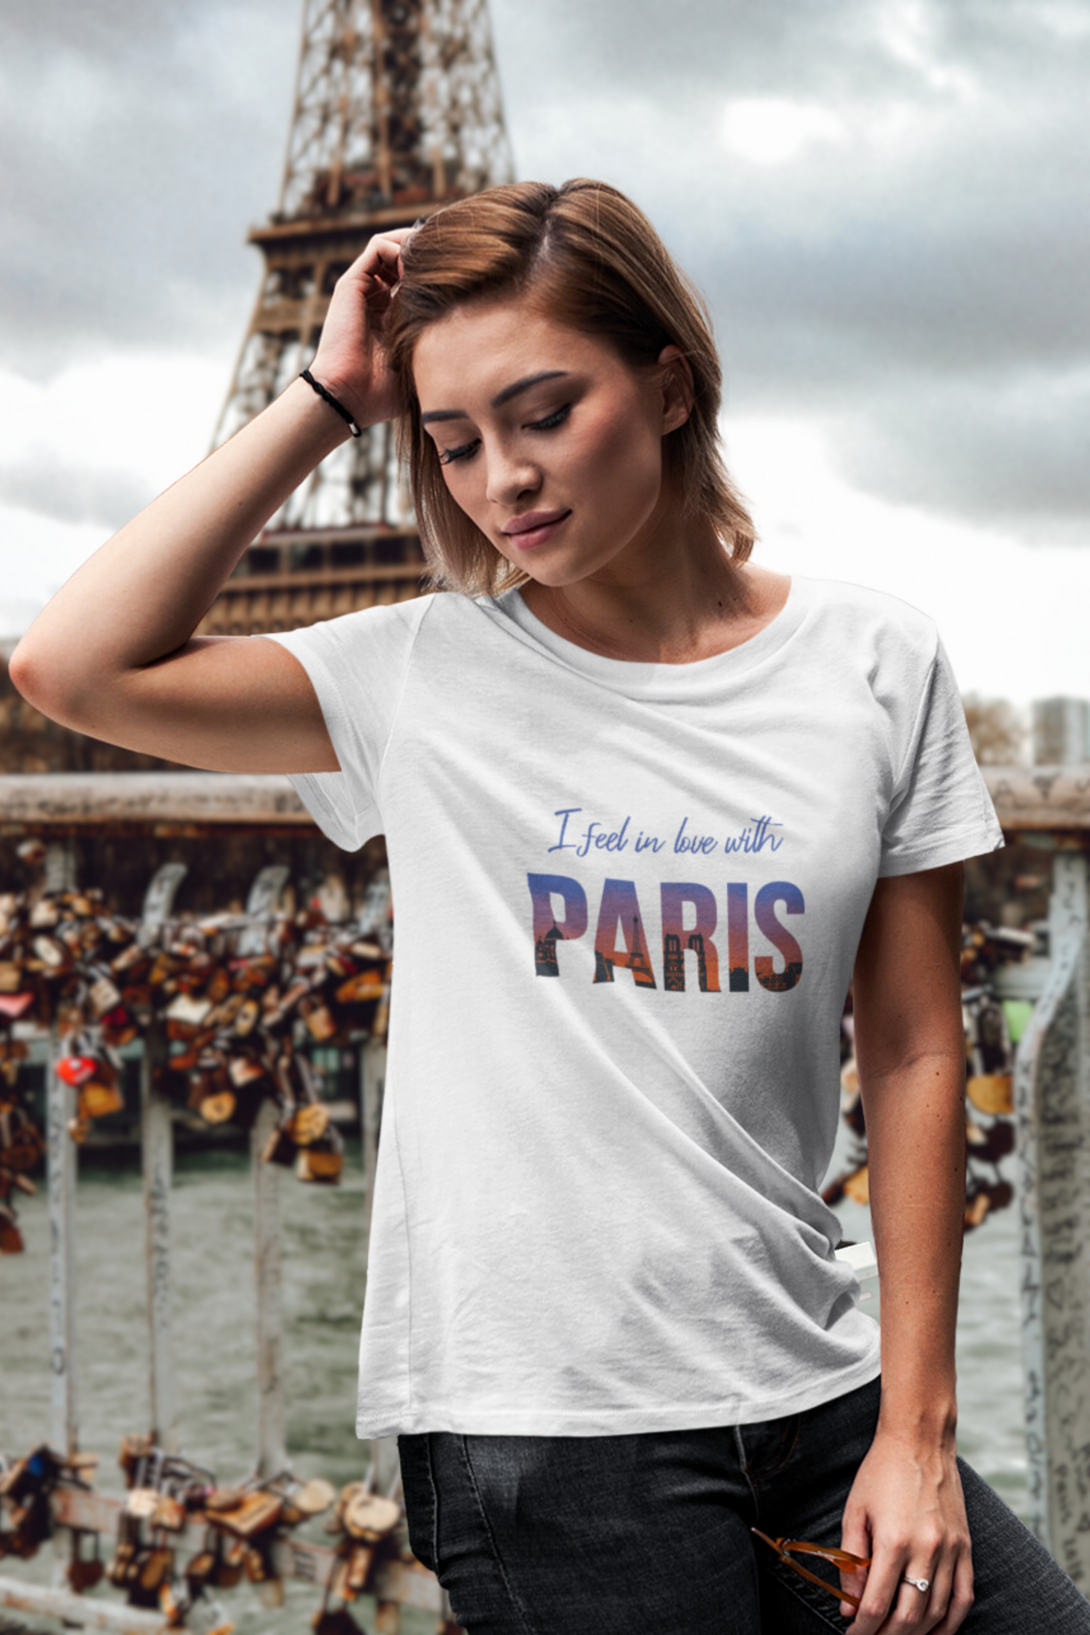 In Love With Paris Printed T-Shirt For Women - WowWaves - 2